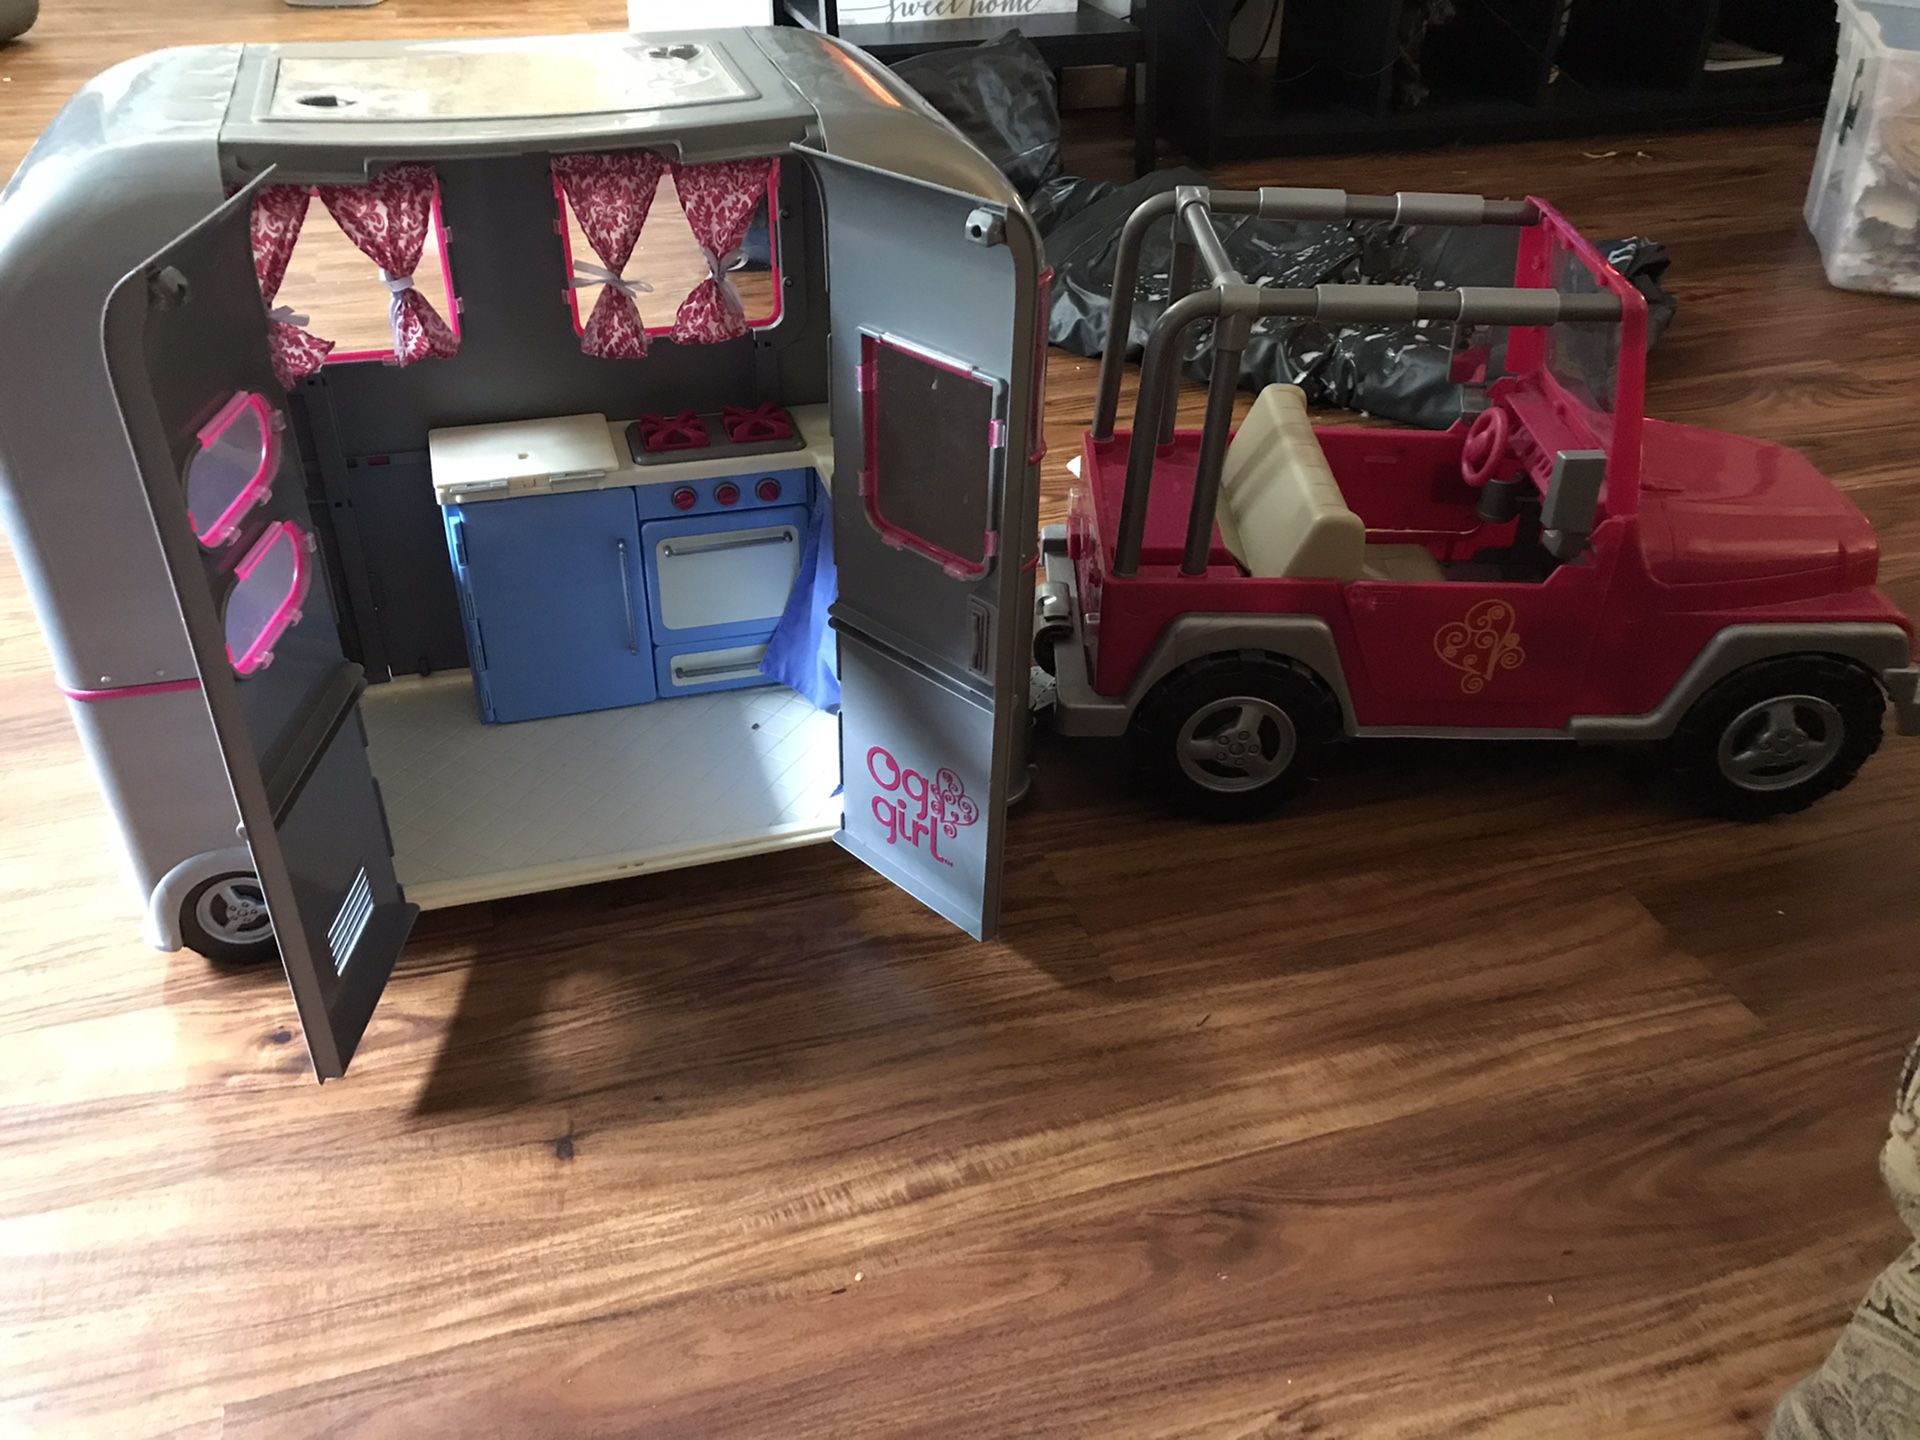 Og girl Jeep and Camper “for American Girl type of dolls”